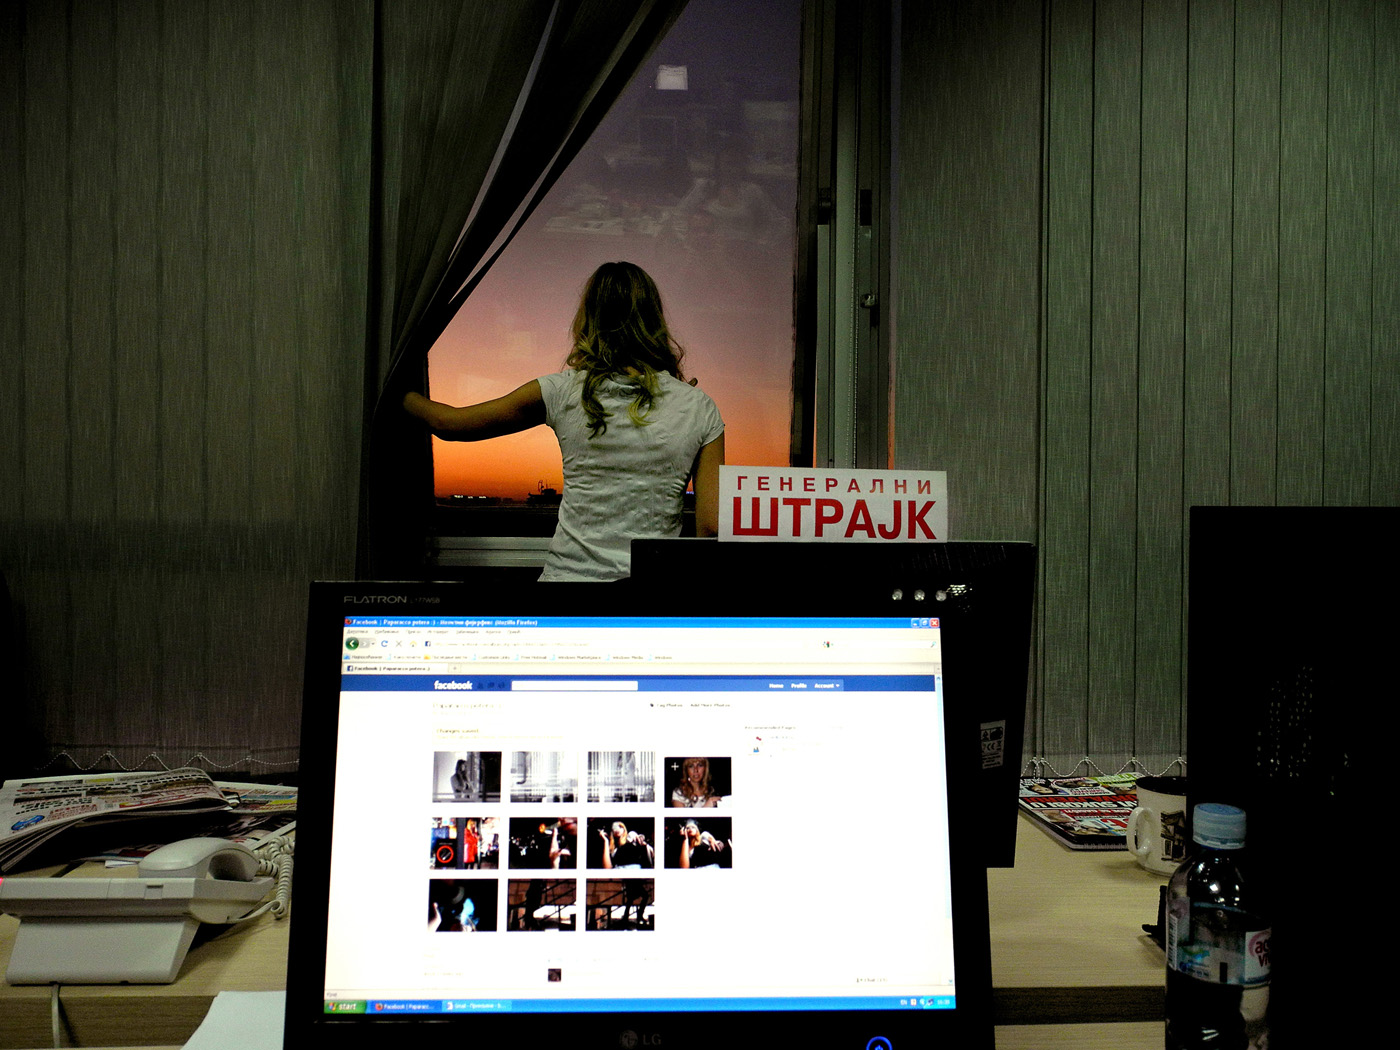 Open facebook page, a note that calls to strike and Biljana, looking through the window